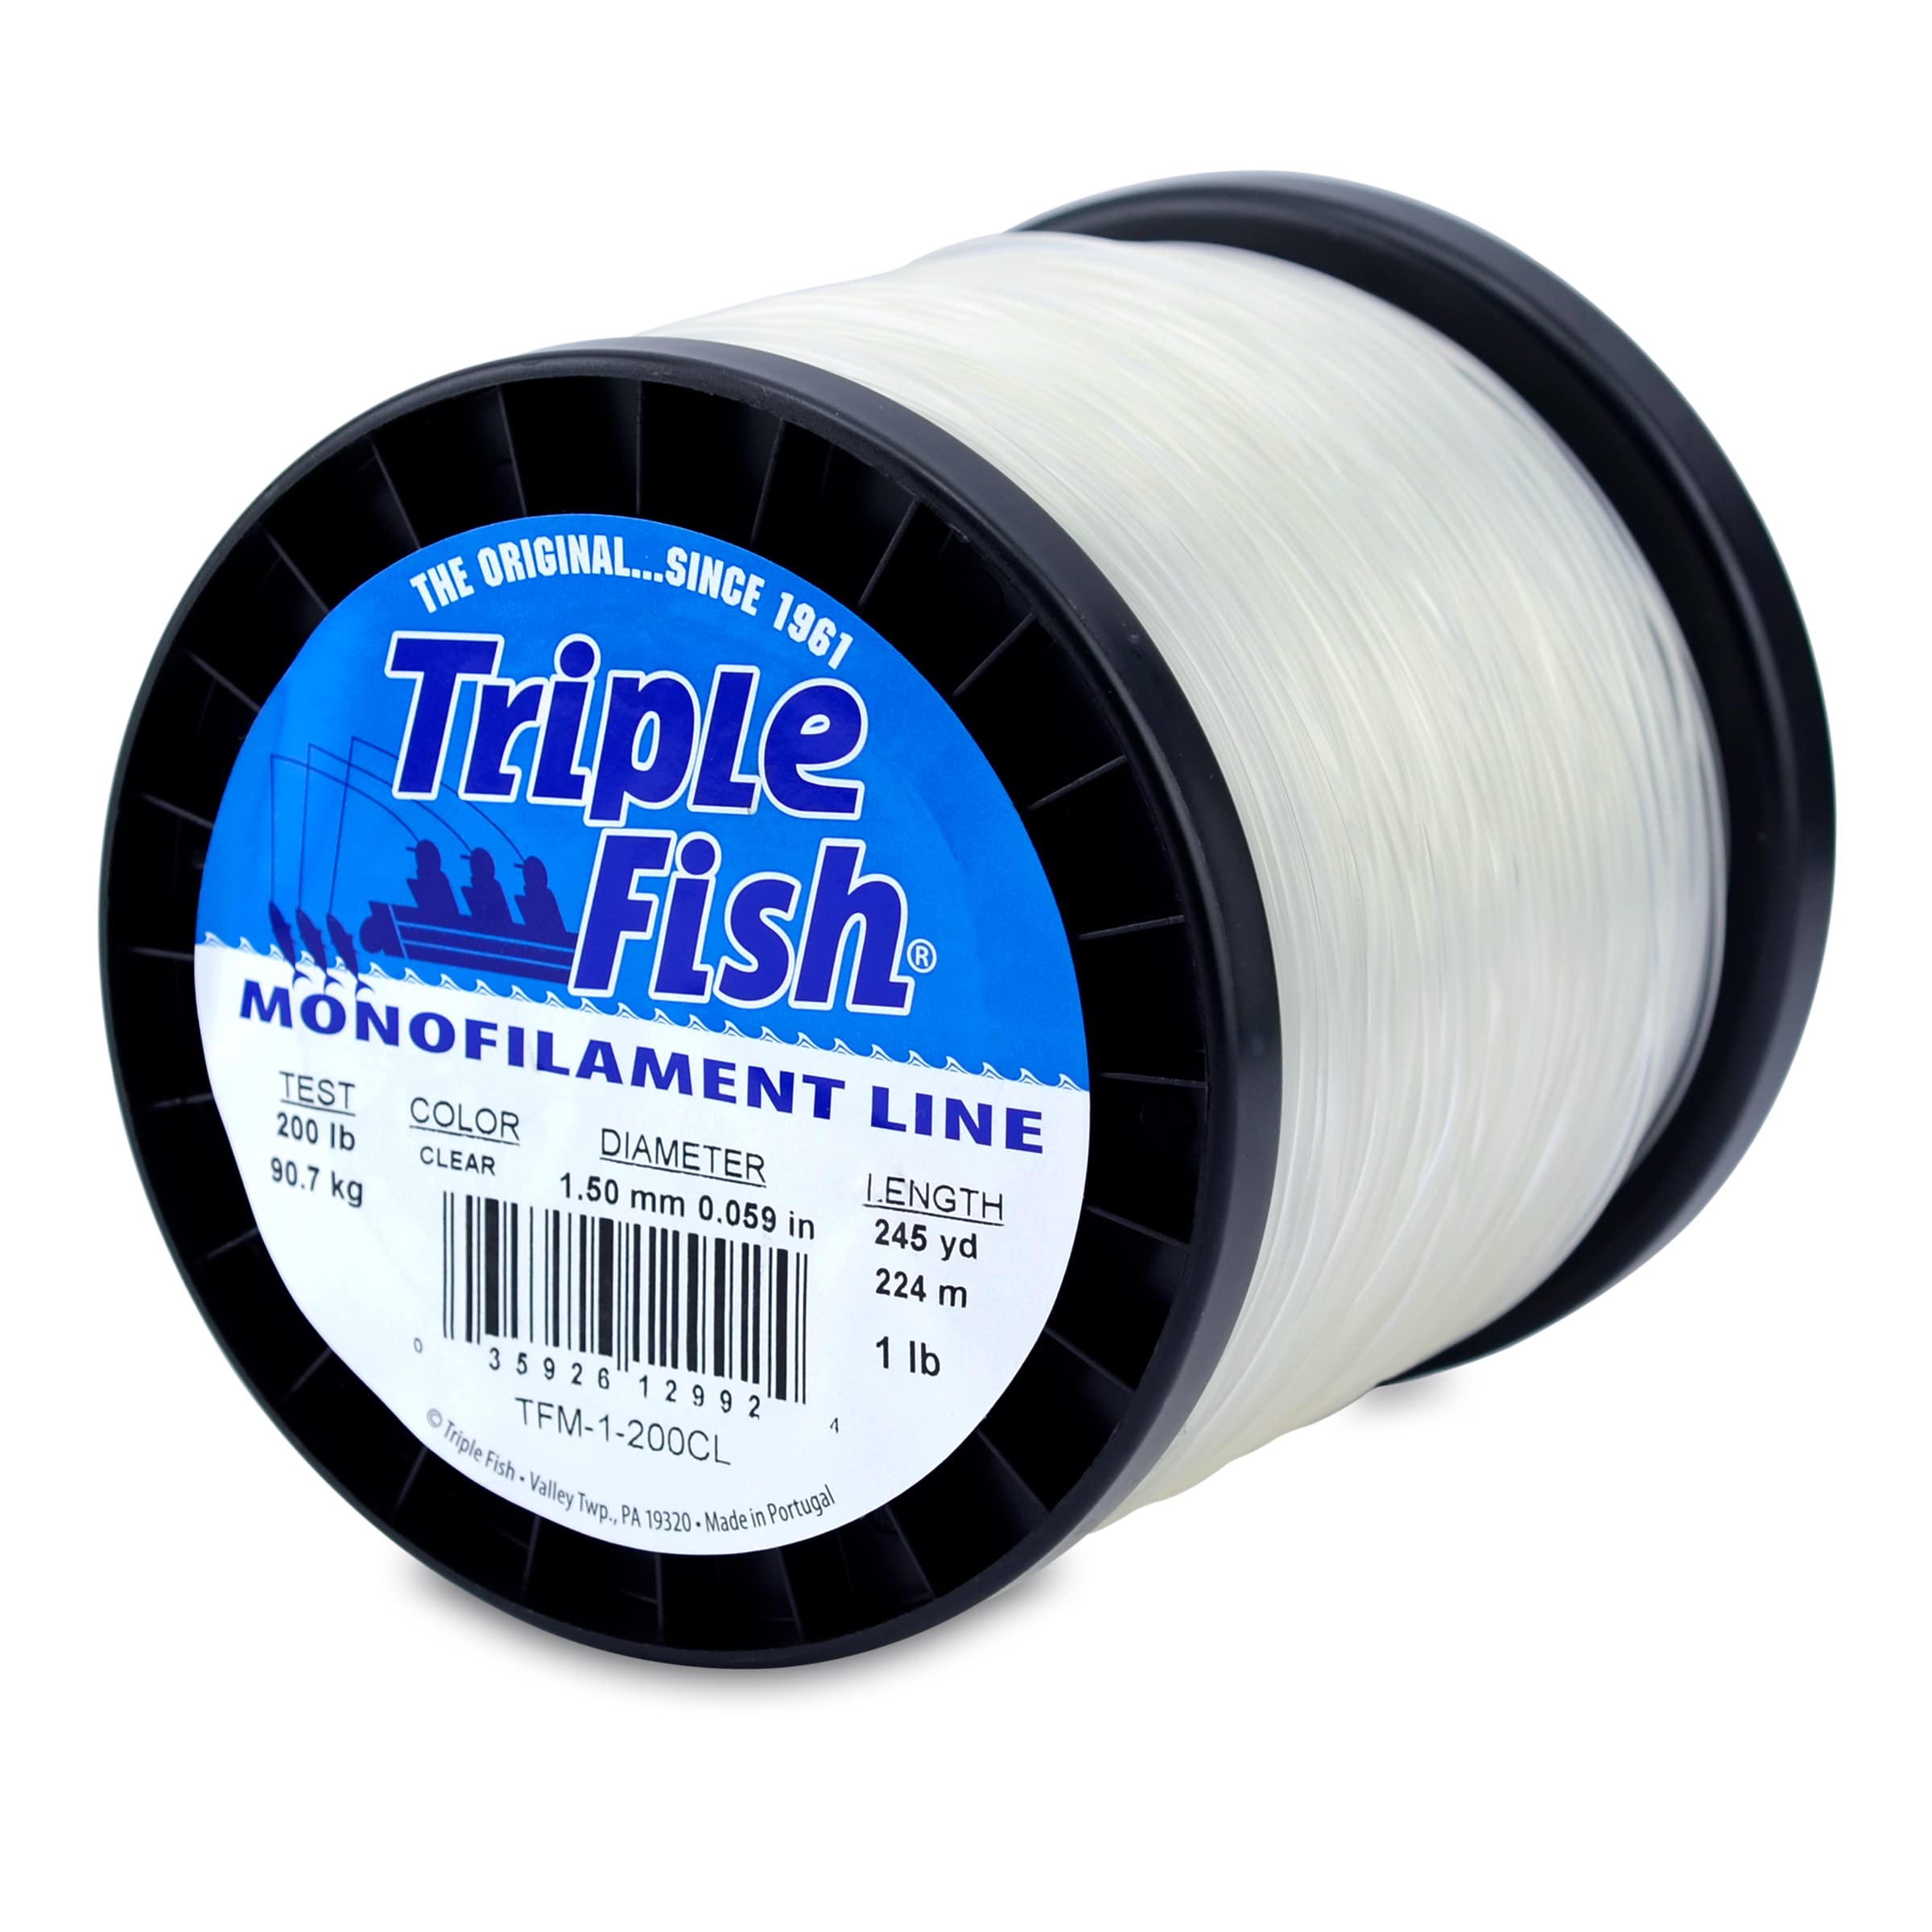 Triple Fish Monofilament Fishing Line - Strong Clear Pink Camo Color for  Trolling, Bottom Fishing, Casting Main Line Catfish, Bass Clear 200 Lb Test  / 1 Lb Spool